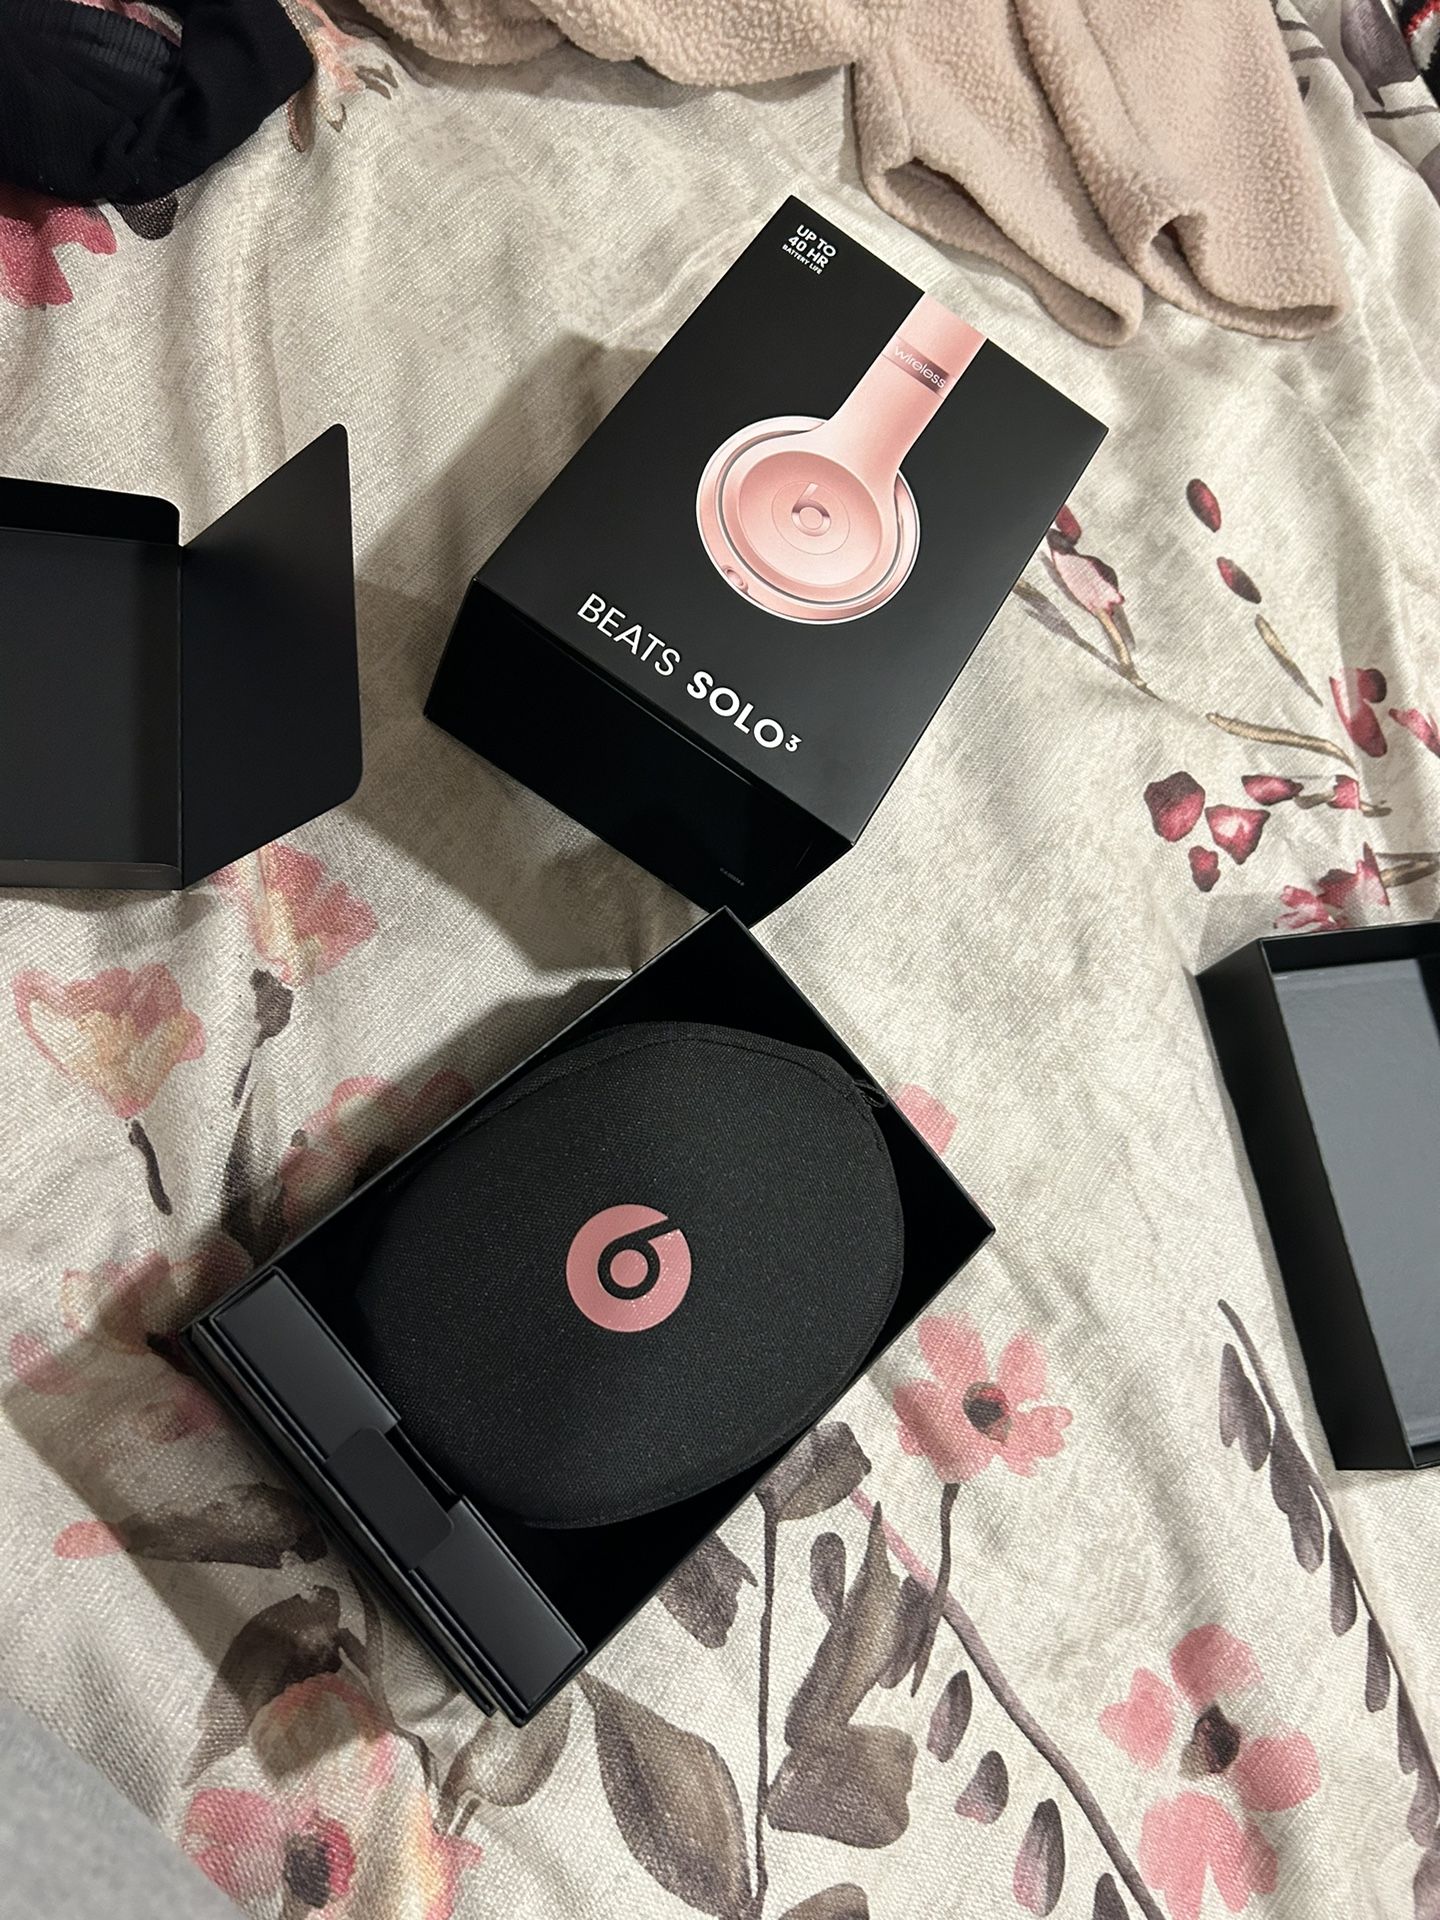 Solo Beats 3 (Rose Gold)